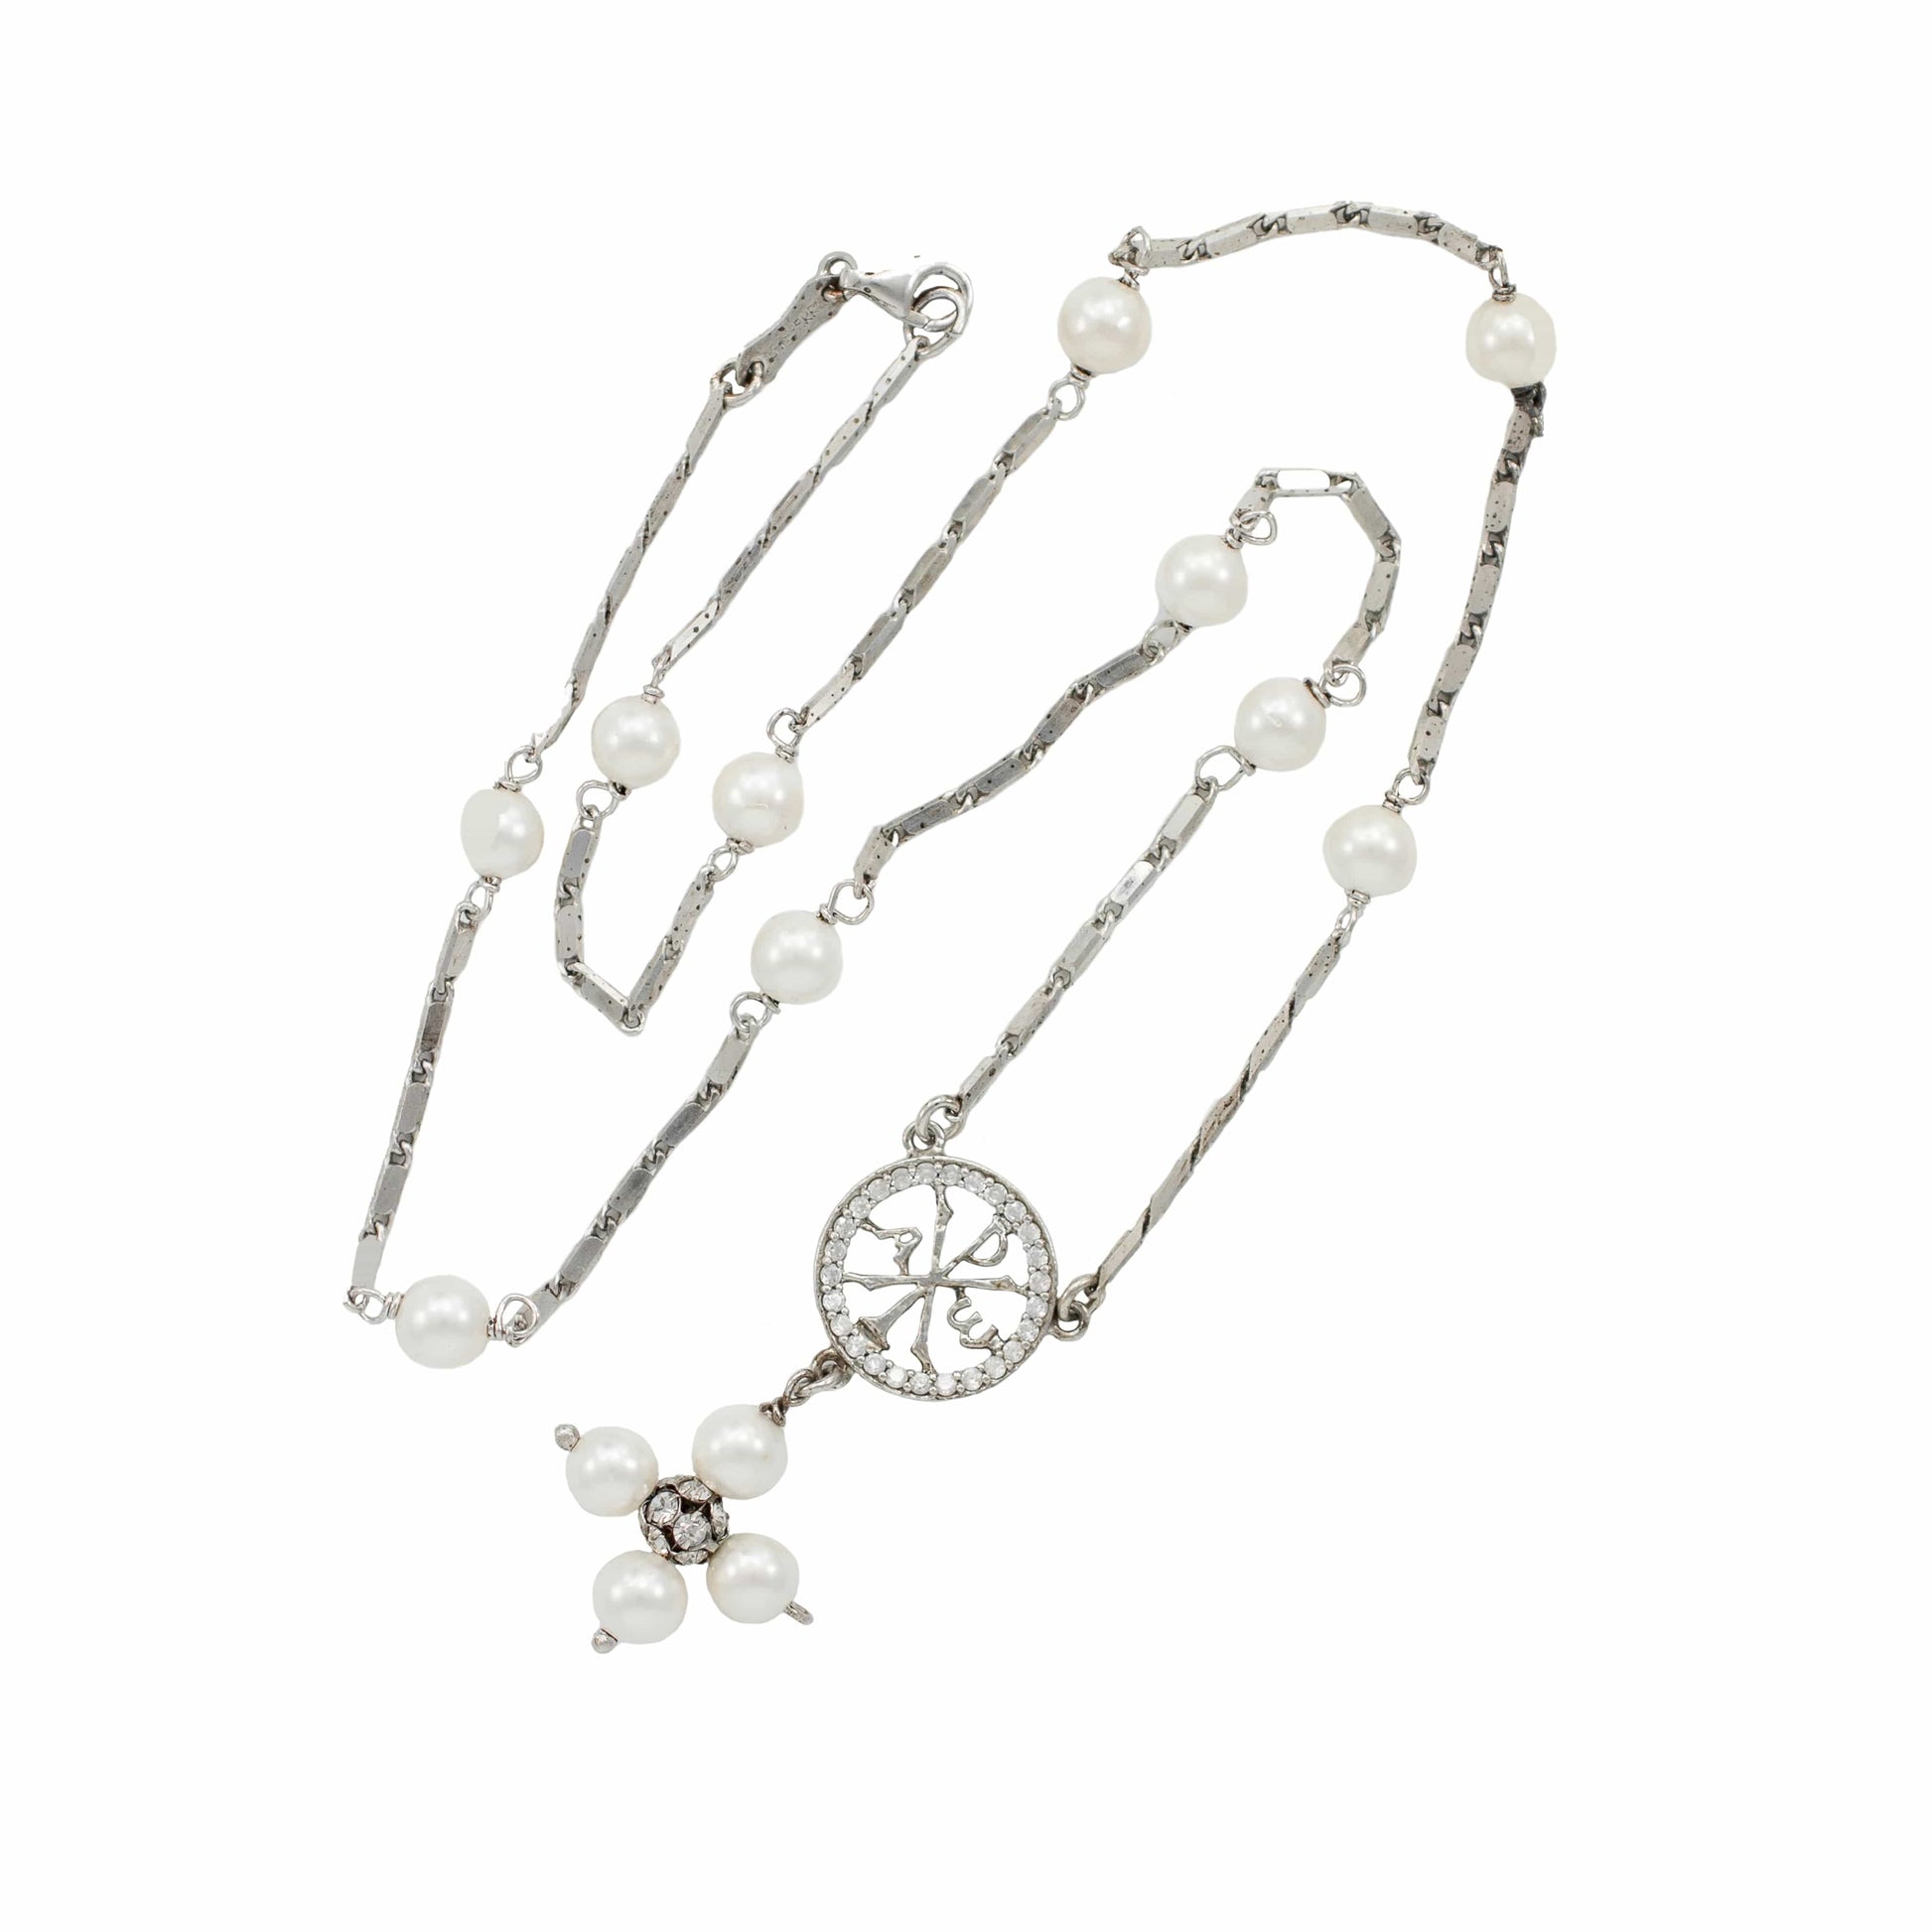 MONDO CATTOLICO Prayer Beads Sterling Silver Rosary Necklace White Glass Pearl